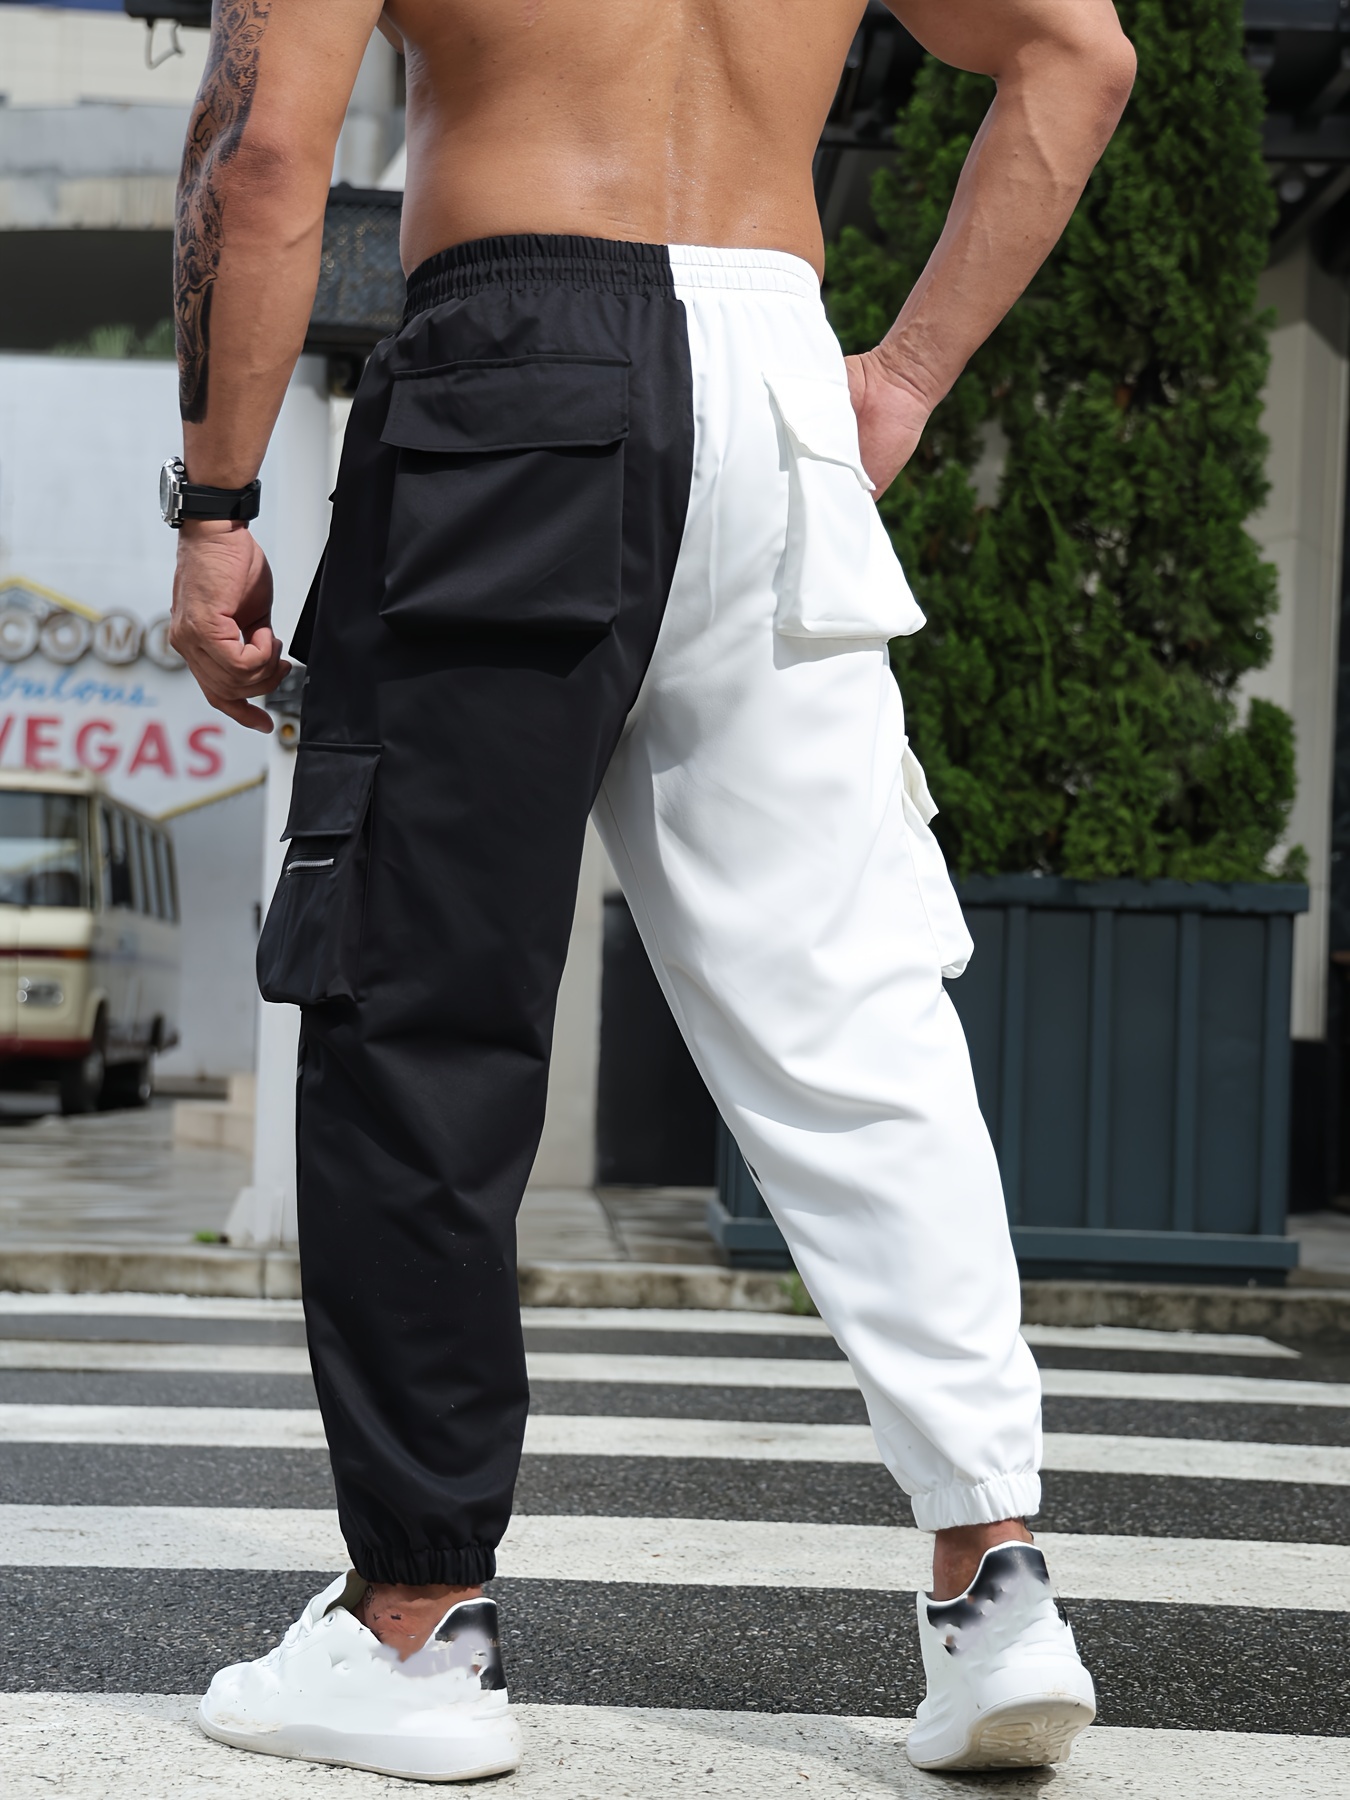 Plus Size Men's Casual Long Pants, Drawstring Solid Trousers With Side  Pocket Design